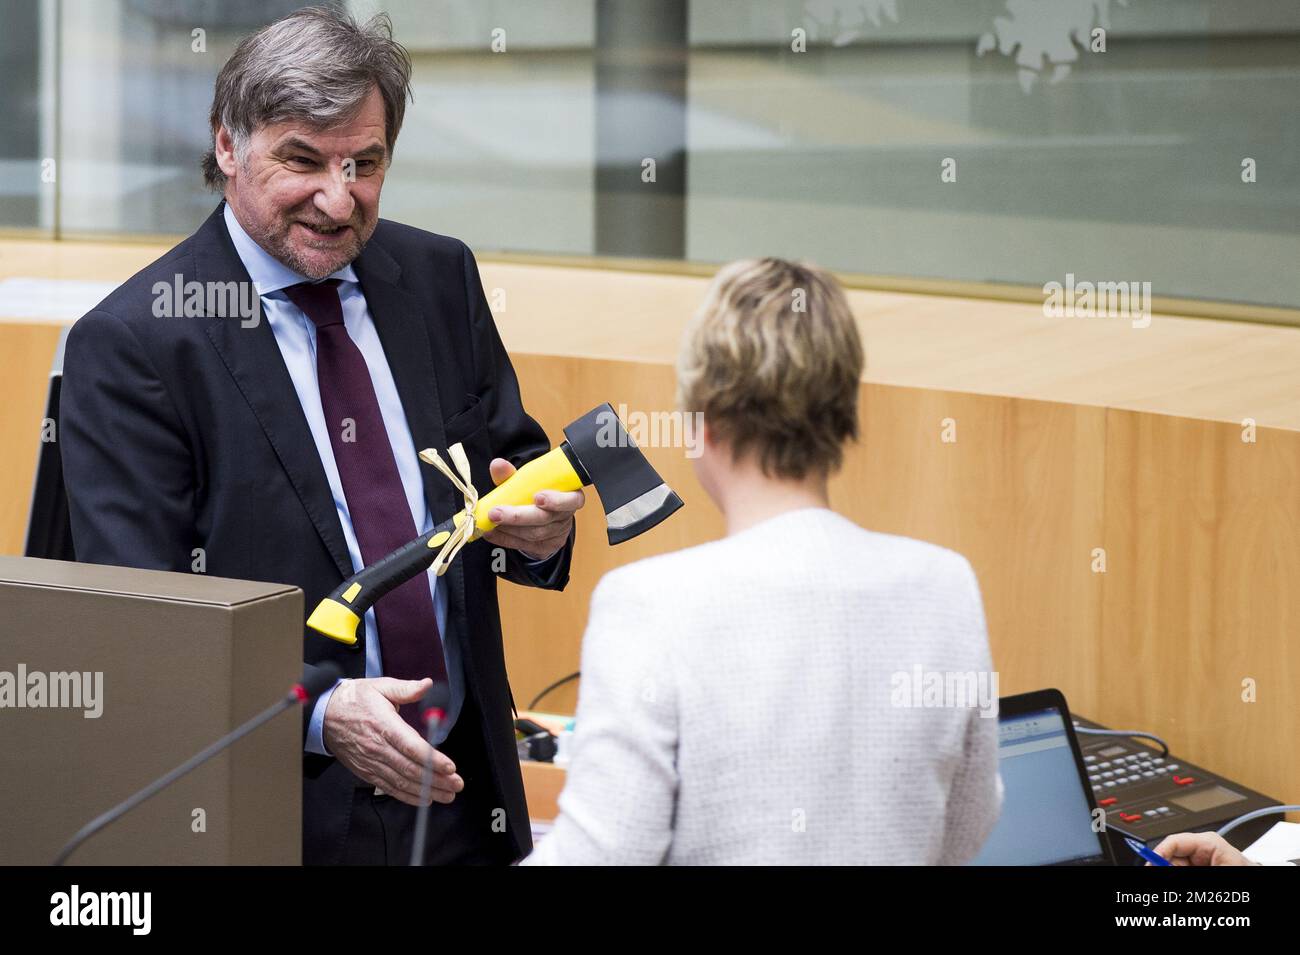 NV-A's Wilfried Vandaele and Flemish Minister of Environment, Spatial Planning and Agriculture Joke Schauvliege after receiving an ax during a plenary session of the Flemish Parliament in Brussels, Wednesday 22 March 2017. BELGA PHOTO JASPER JACOBS Stock Photo